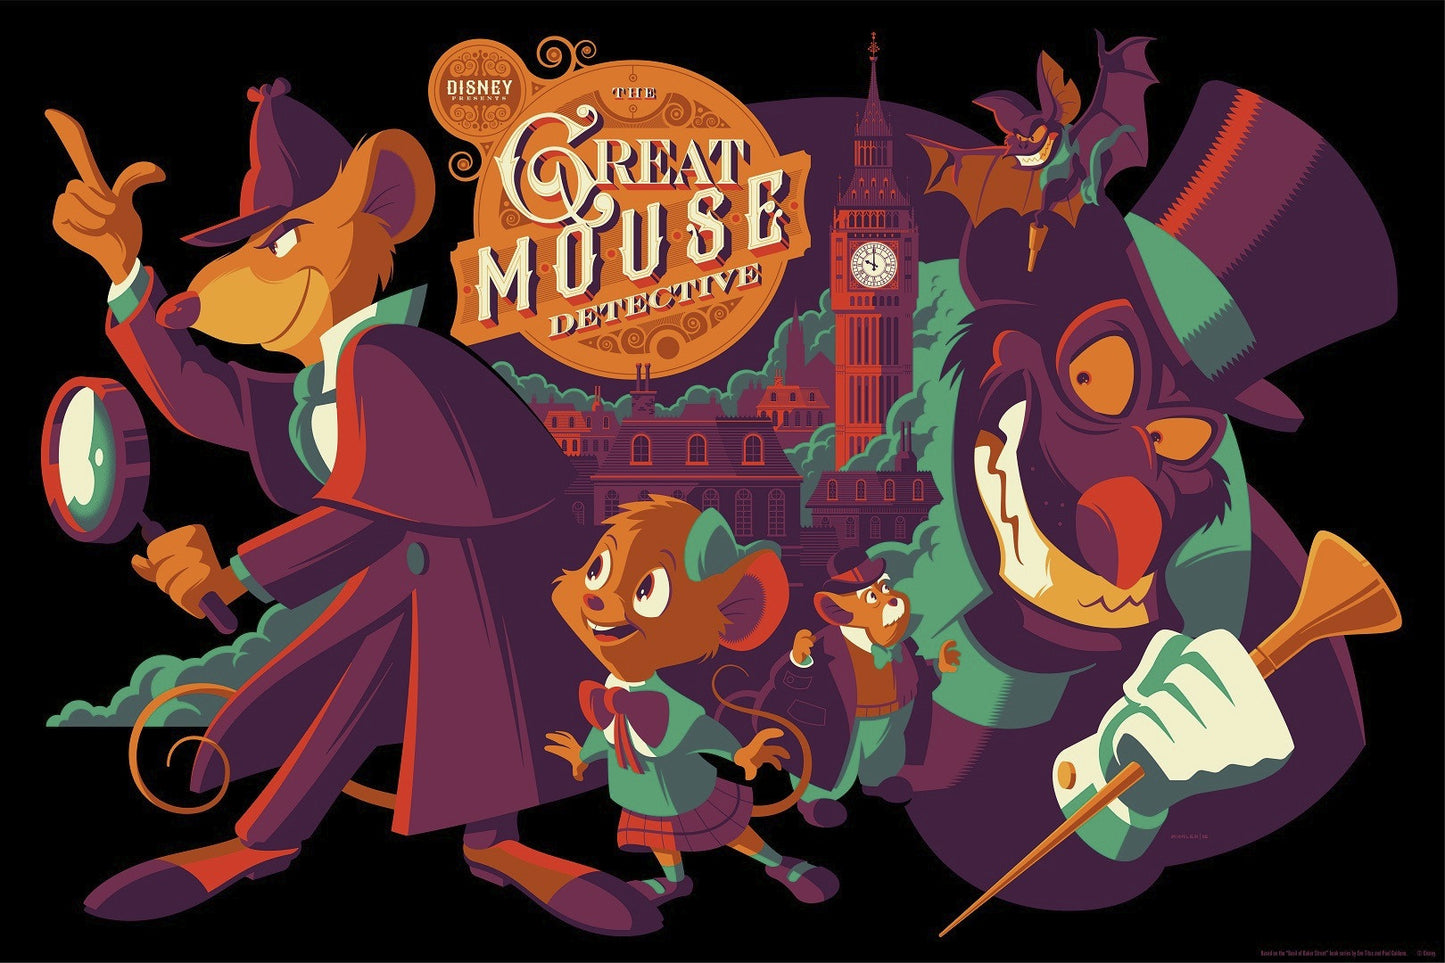 Cyclops Print Works Print #50V: The Great Mouse Detective Variant Edition by Tom Whalen